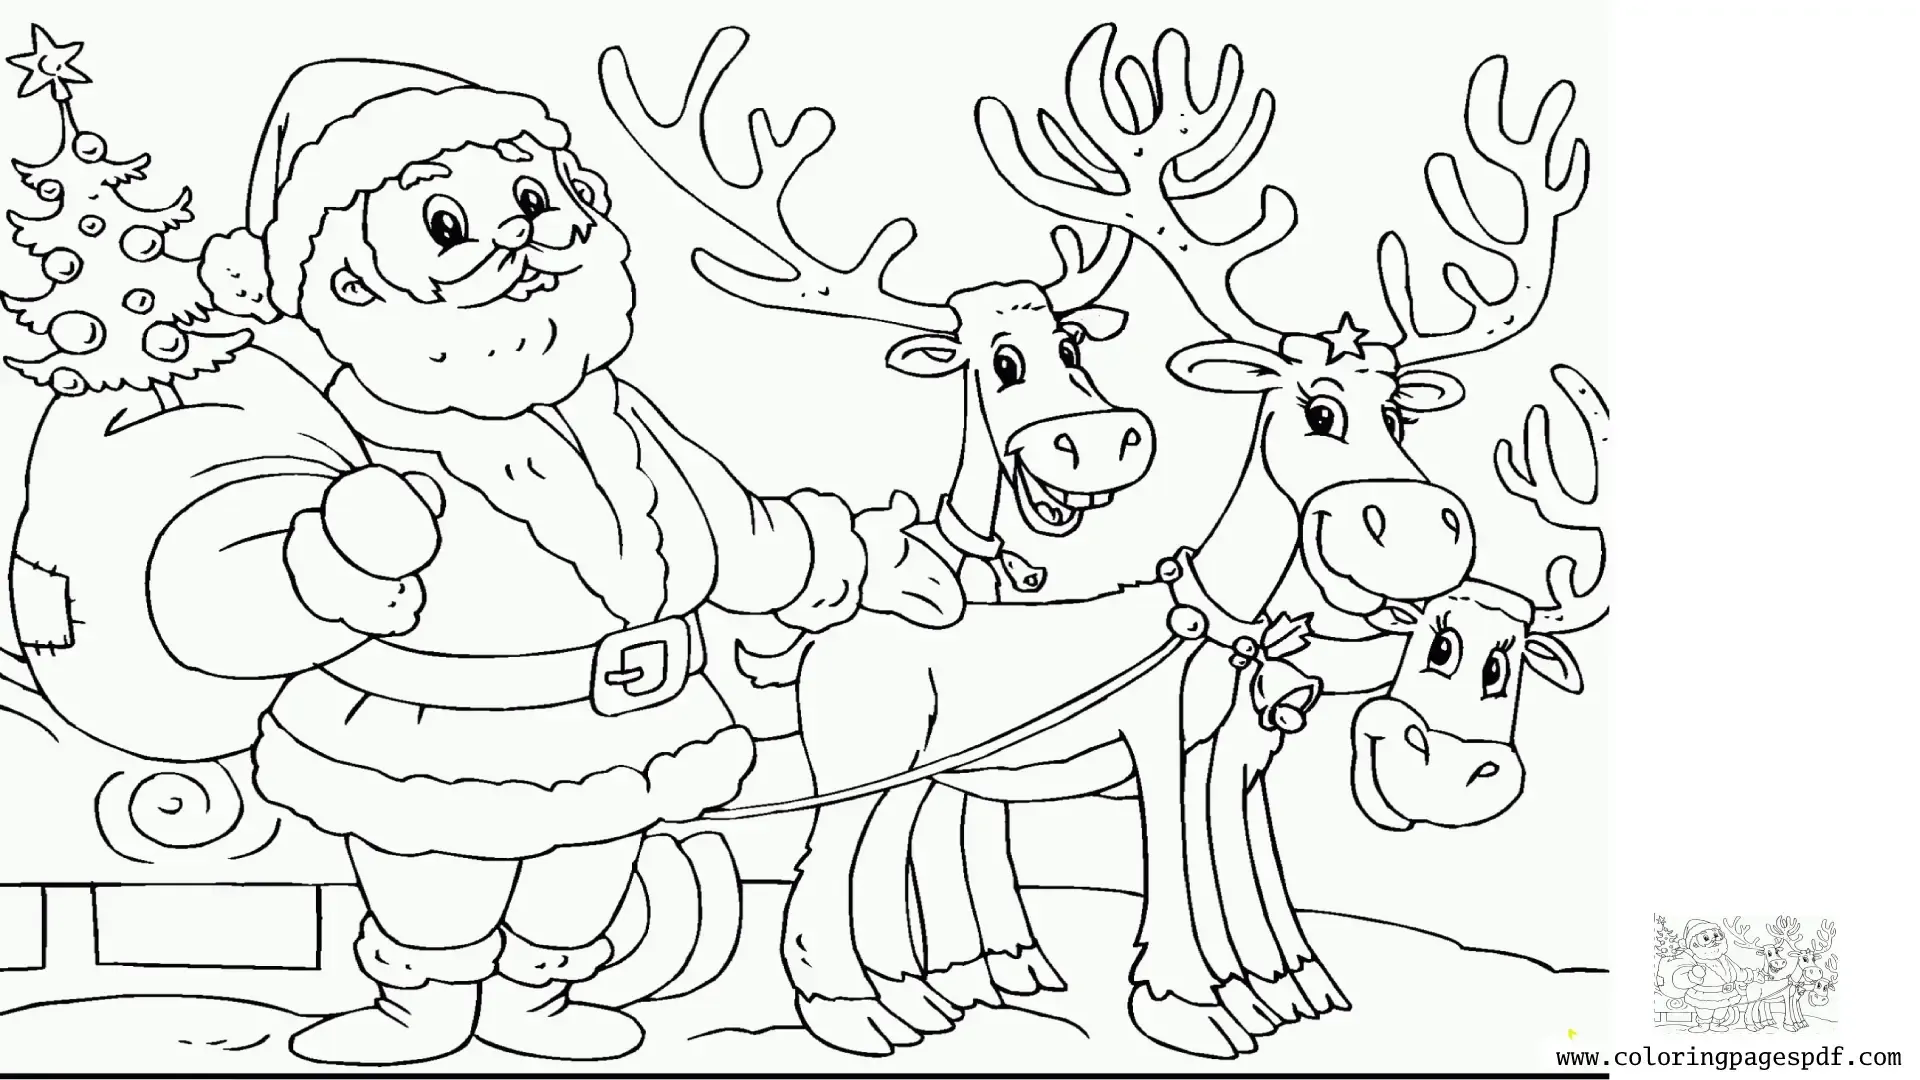 Coloring Page Of Santa With His Deers